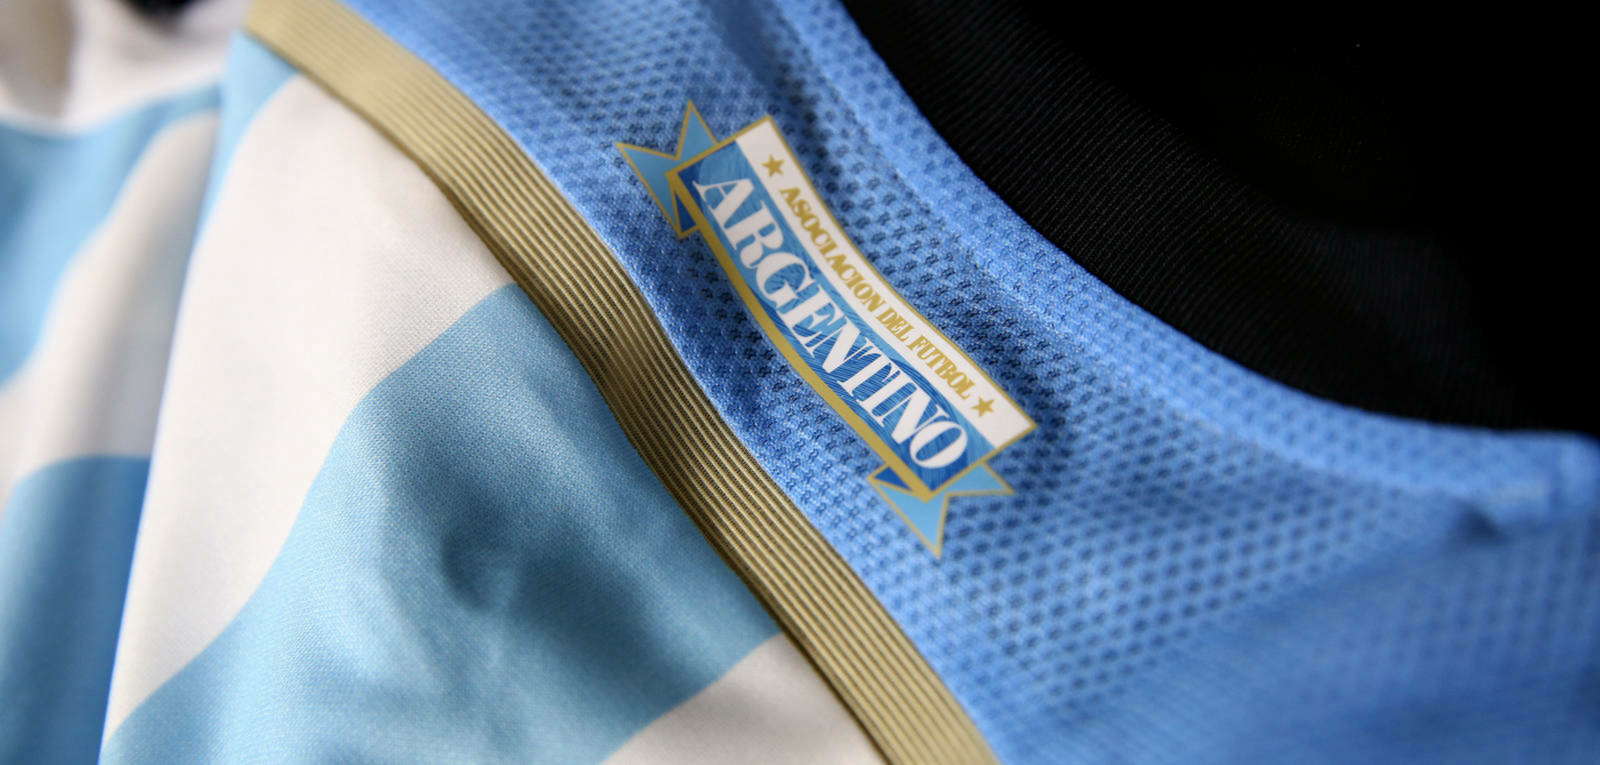 New Jersey of Argentina